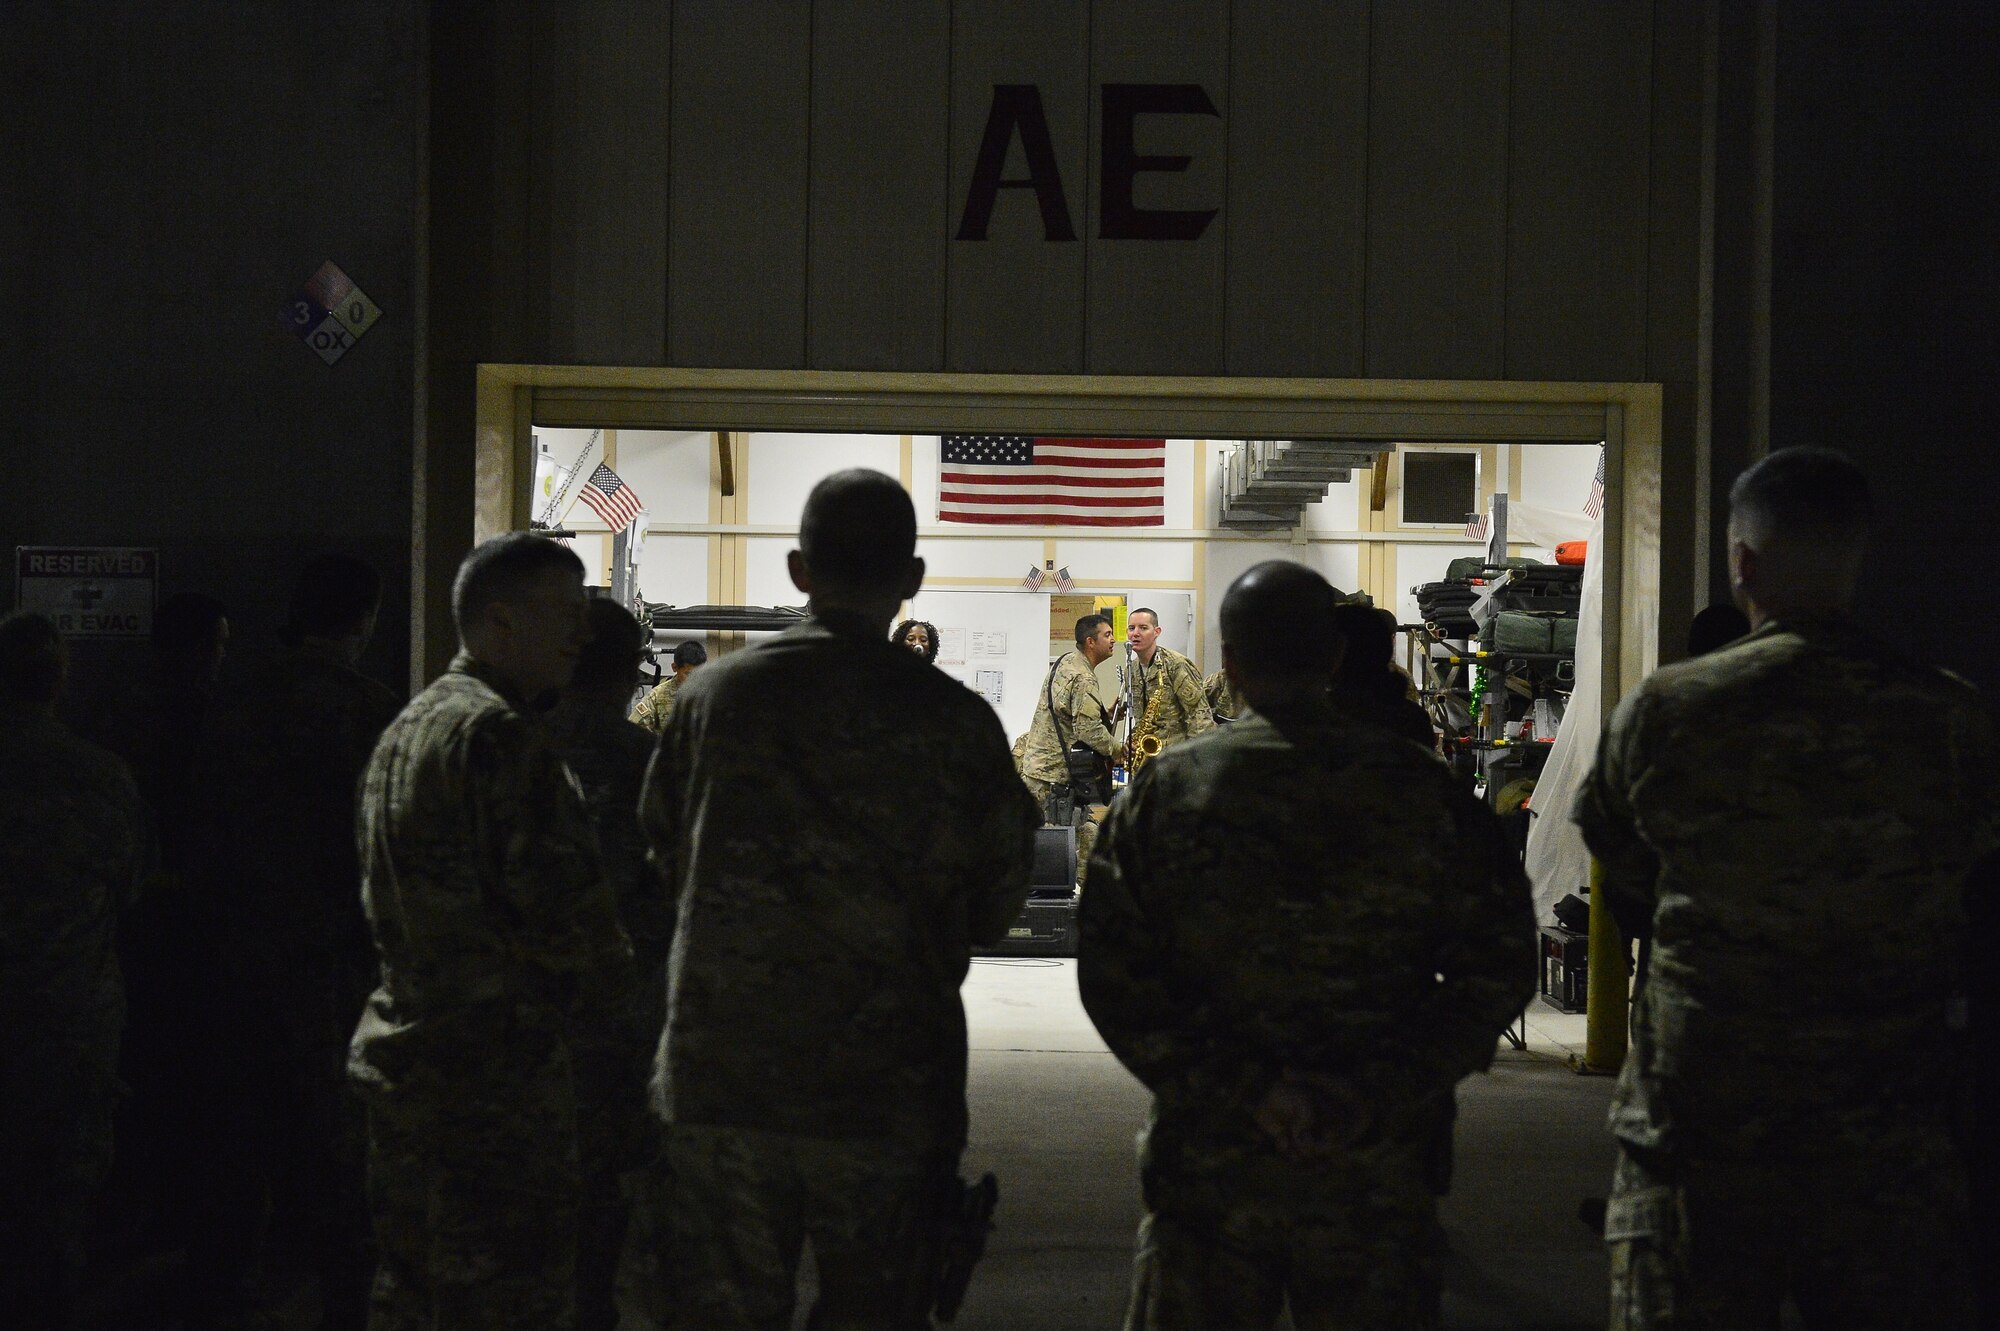 Members of the 455th Expeditionary Aeromedical Evacuation Squadron watch the Air Forces Central Command Band, Hypersonic, perform at Bagram Air Base April 11, 2014. The performance was a display of gratitude for men and women of the 455 EAES and the work they do saving lives throughout the region. (U.S. Air Force photo/Staff Sgt. Vernon Young)